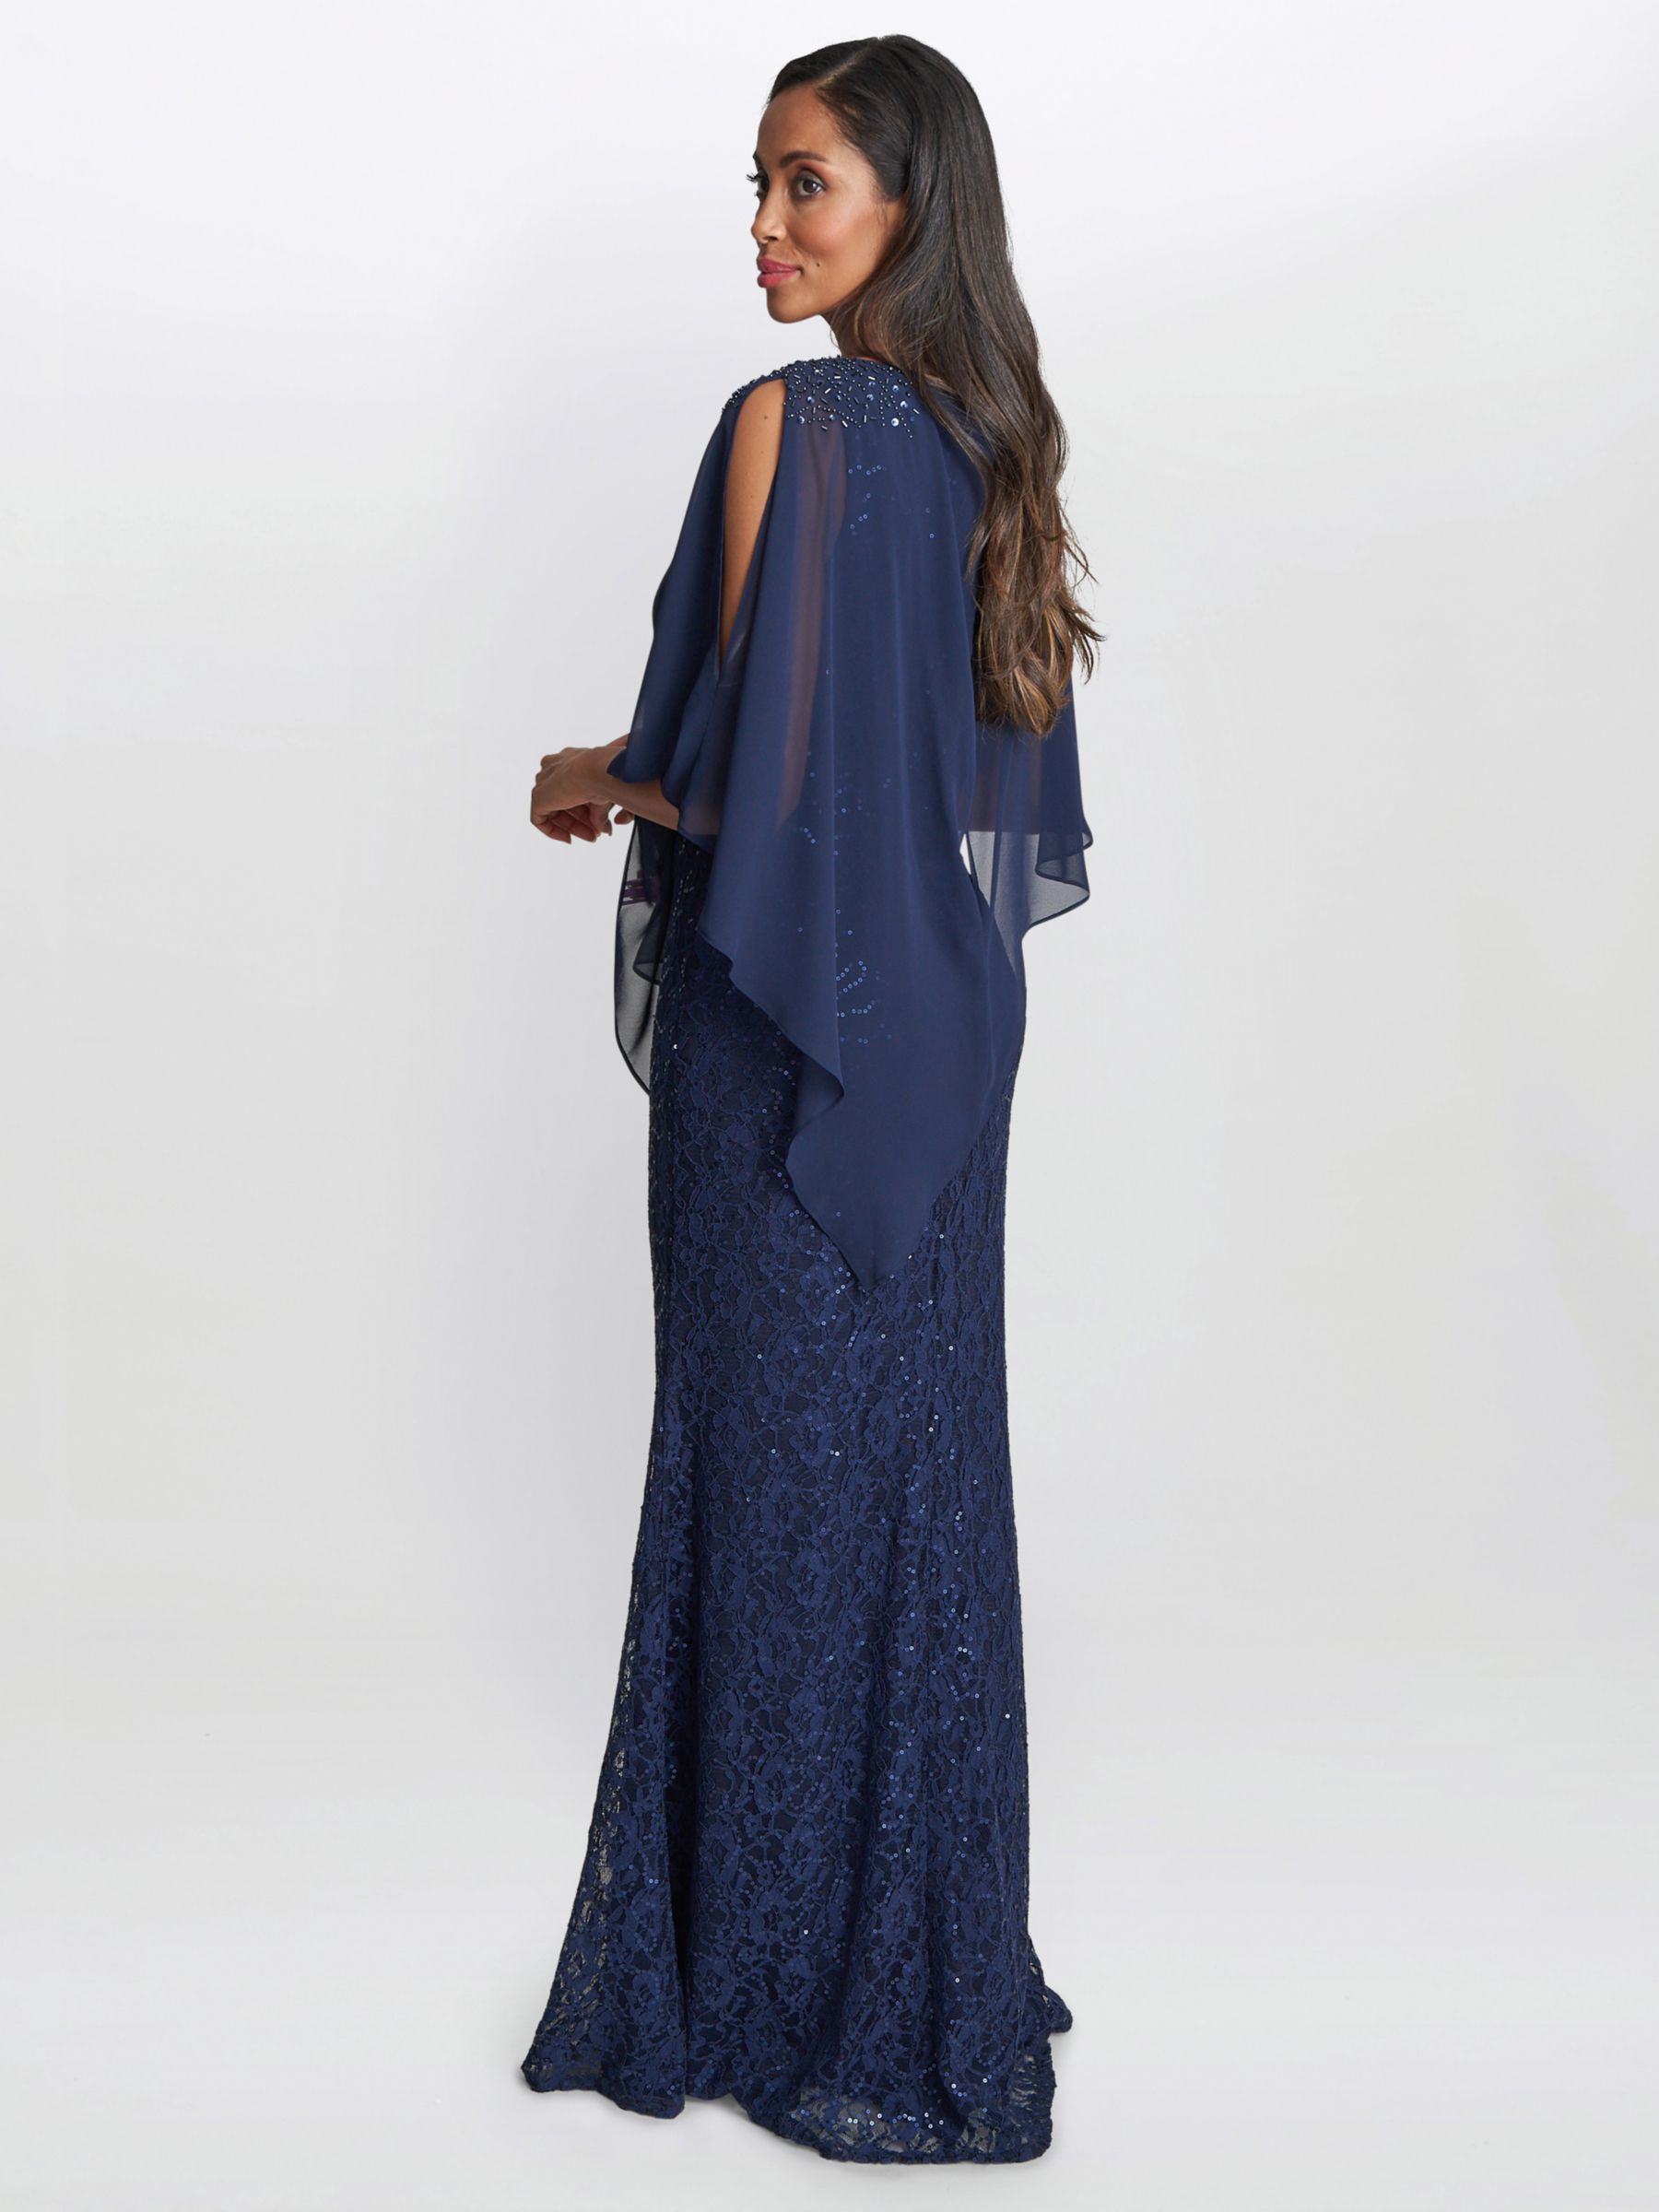 Gina Bacconi Ginger Sequin Lace Dress with Chiffon Cape, Spring Navy